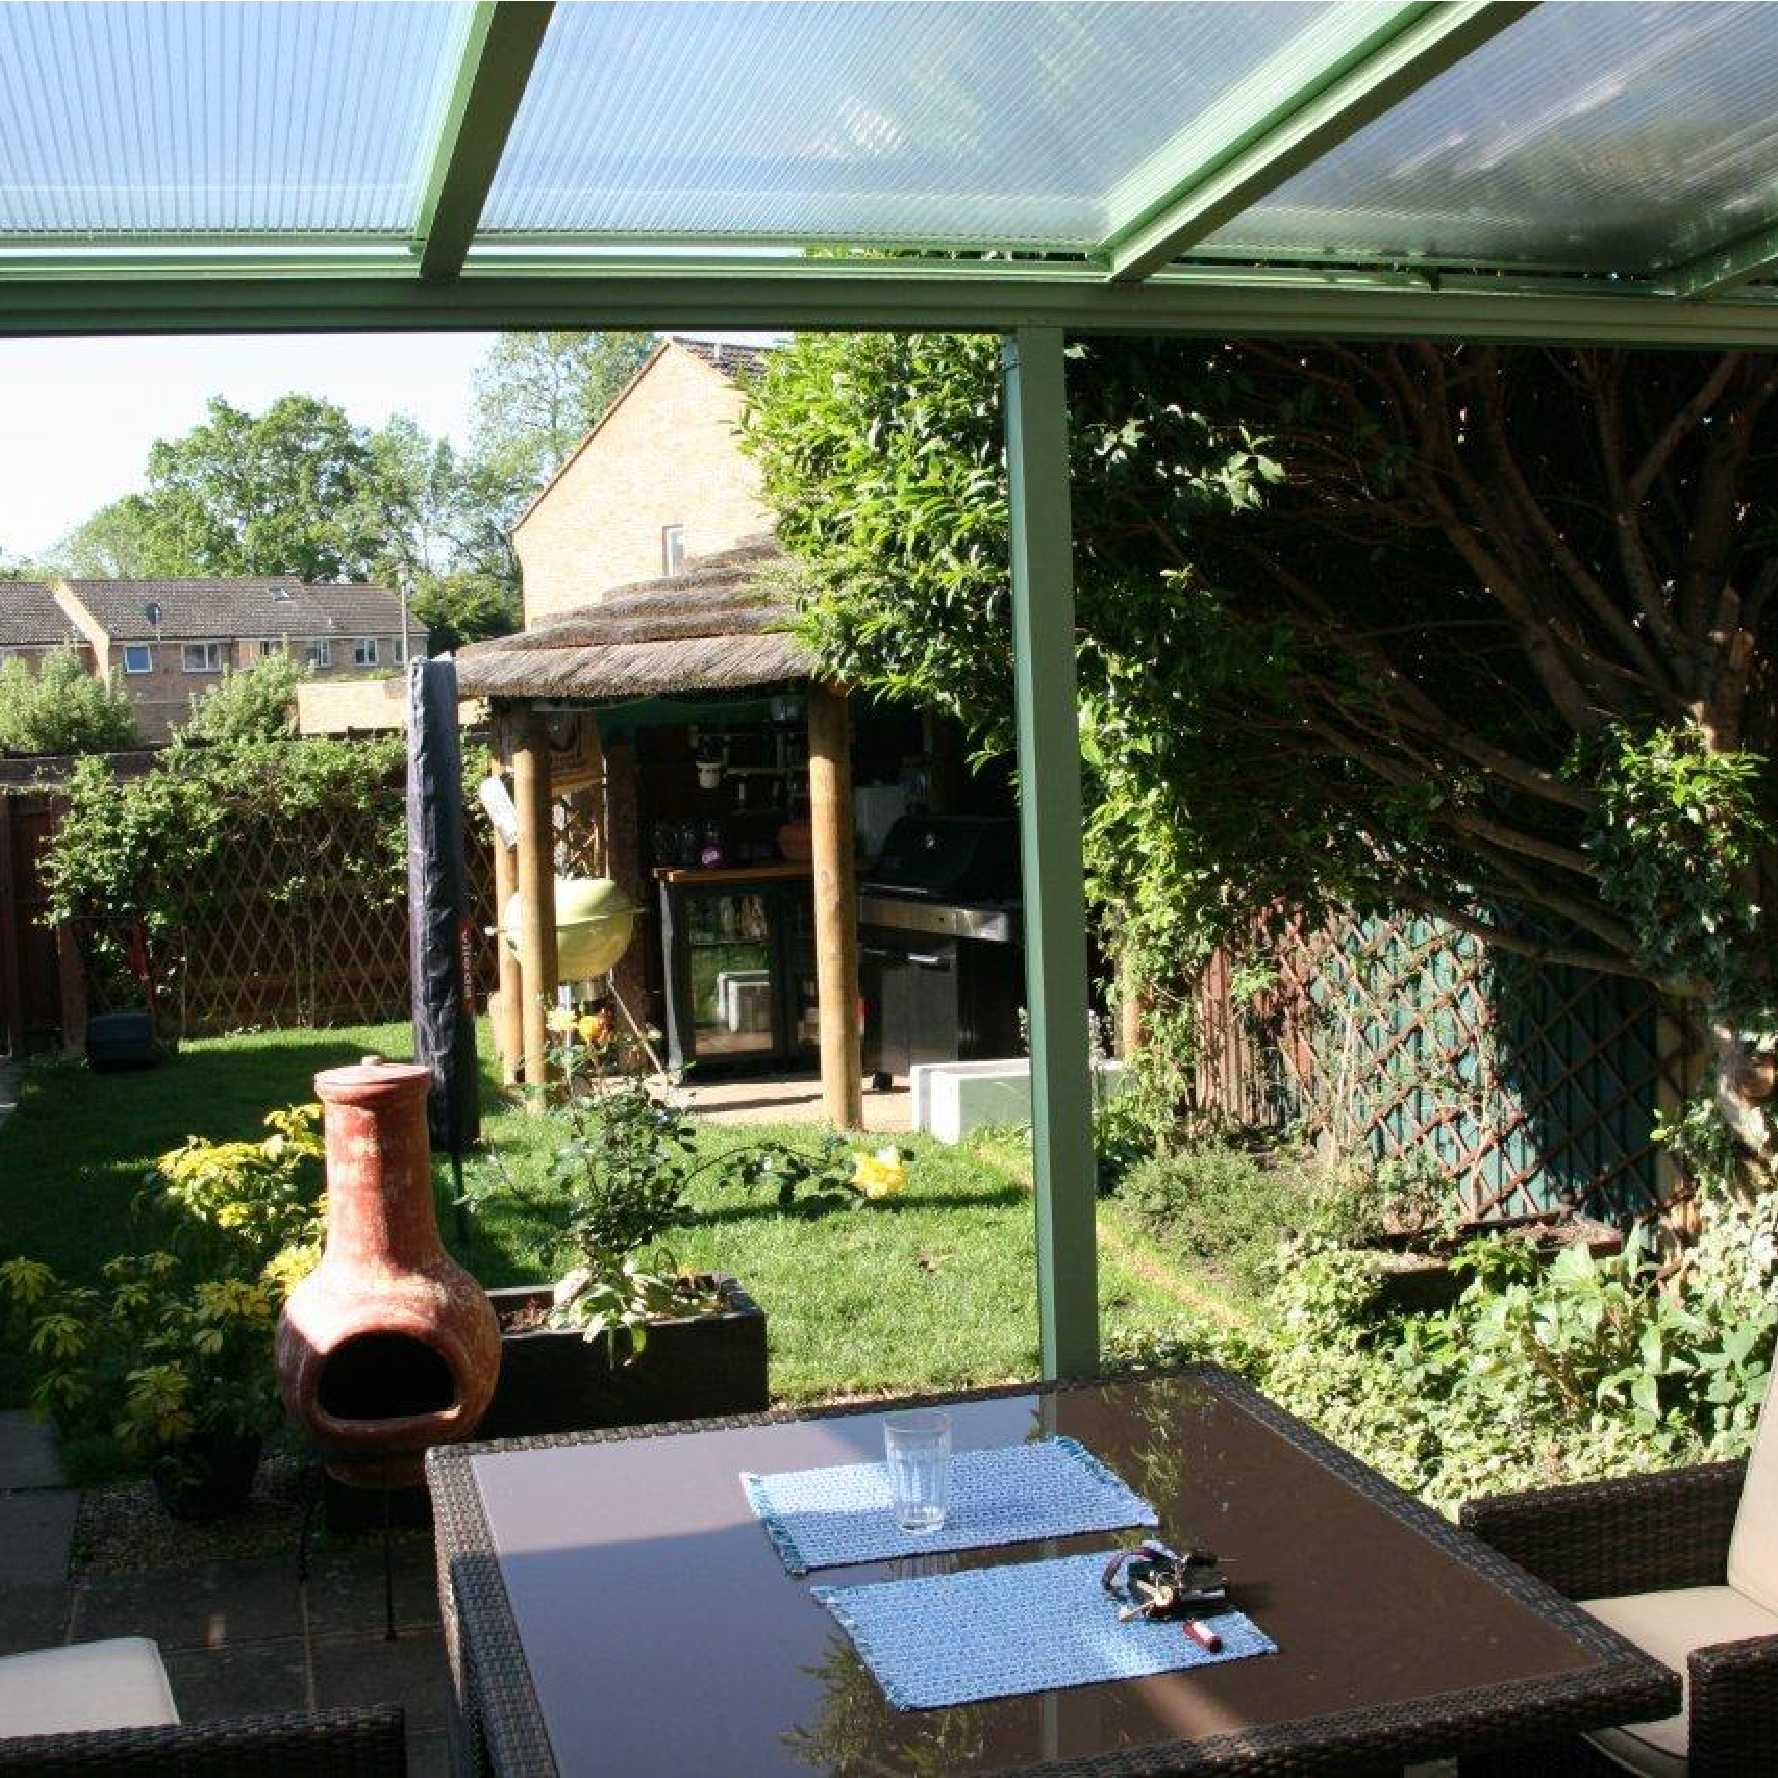 Affordable Omega Smart Lean-To Canopy, White with 16mm Polycarbonate Glazing - 6.0m (W) x 4.5m (P), (3) Supporting Posts